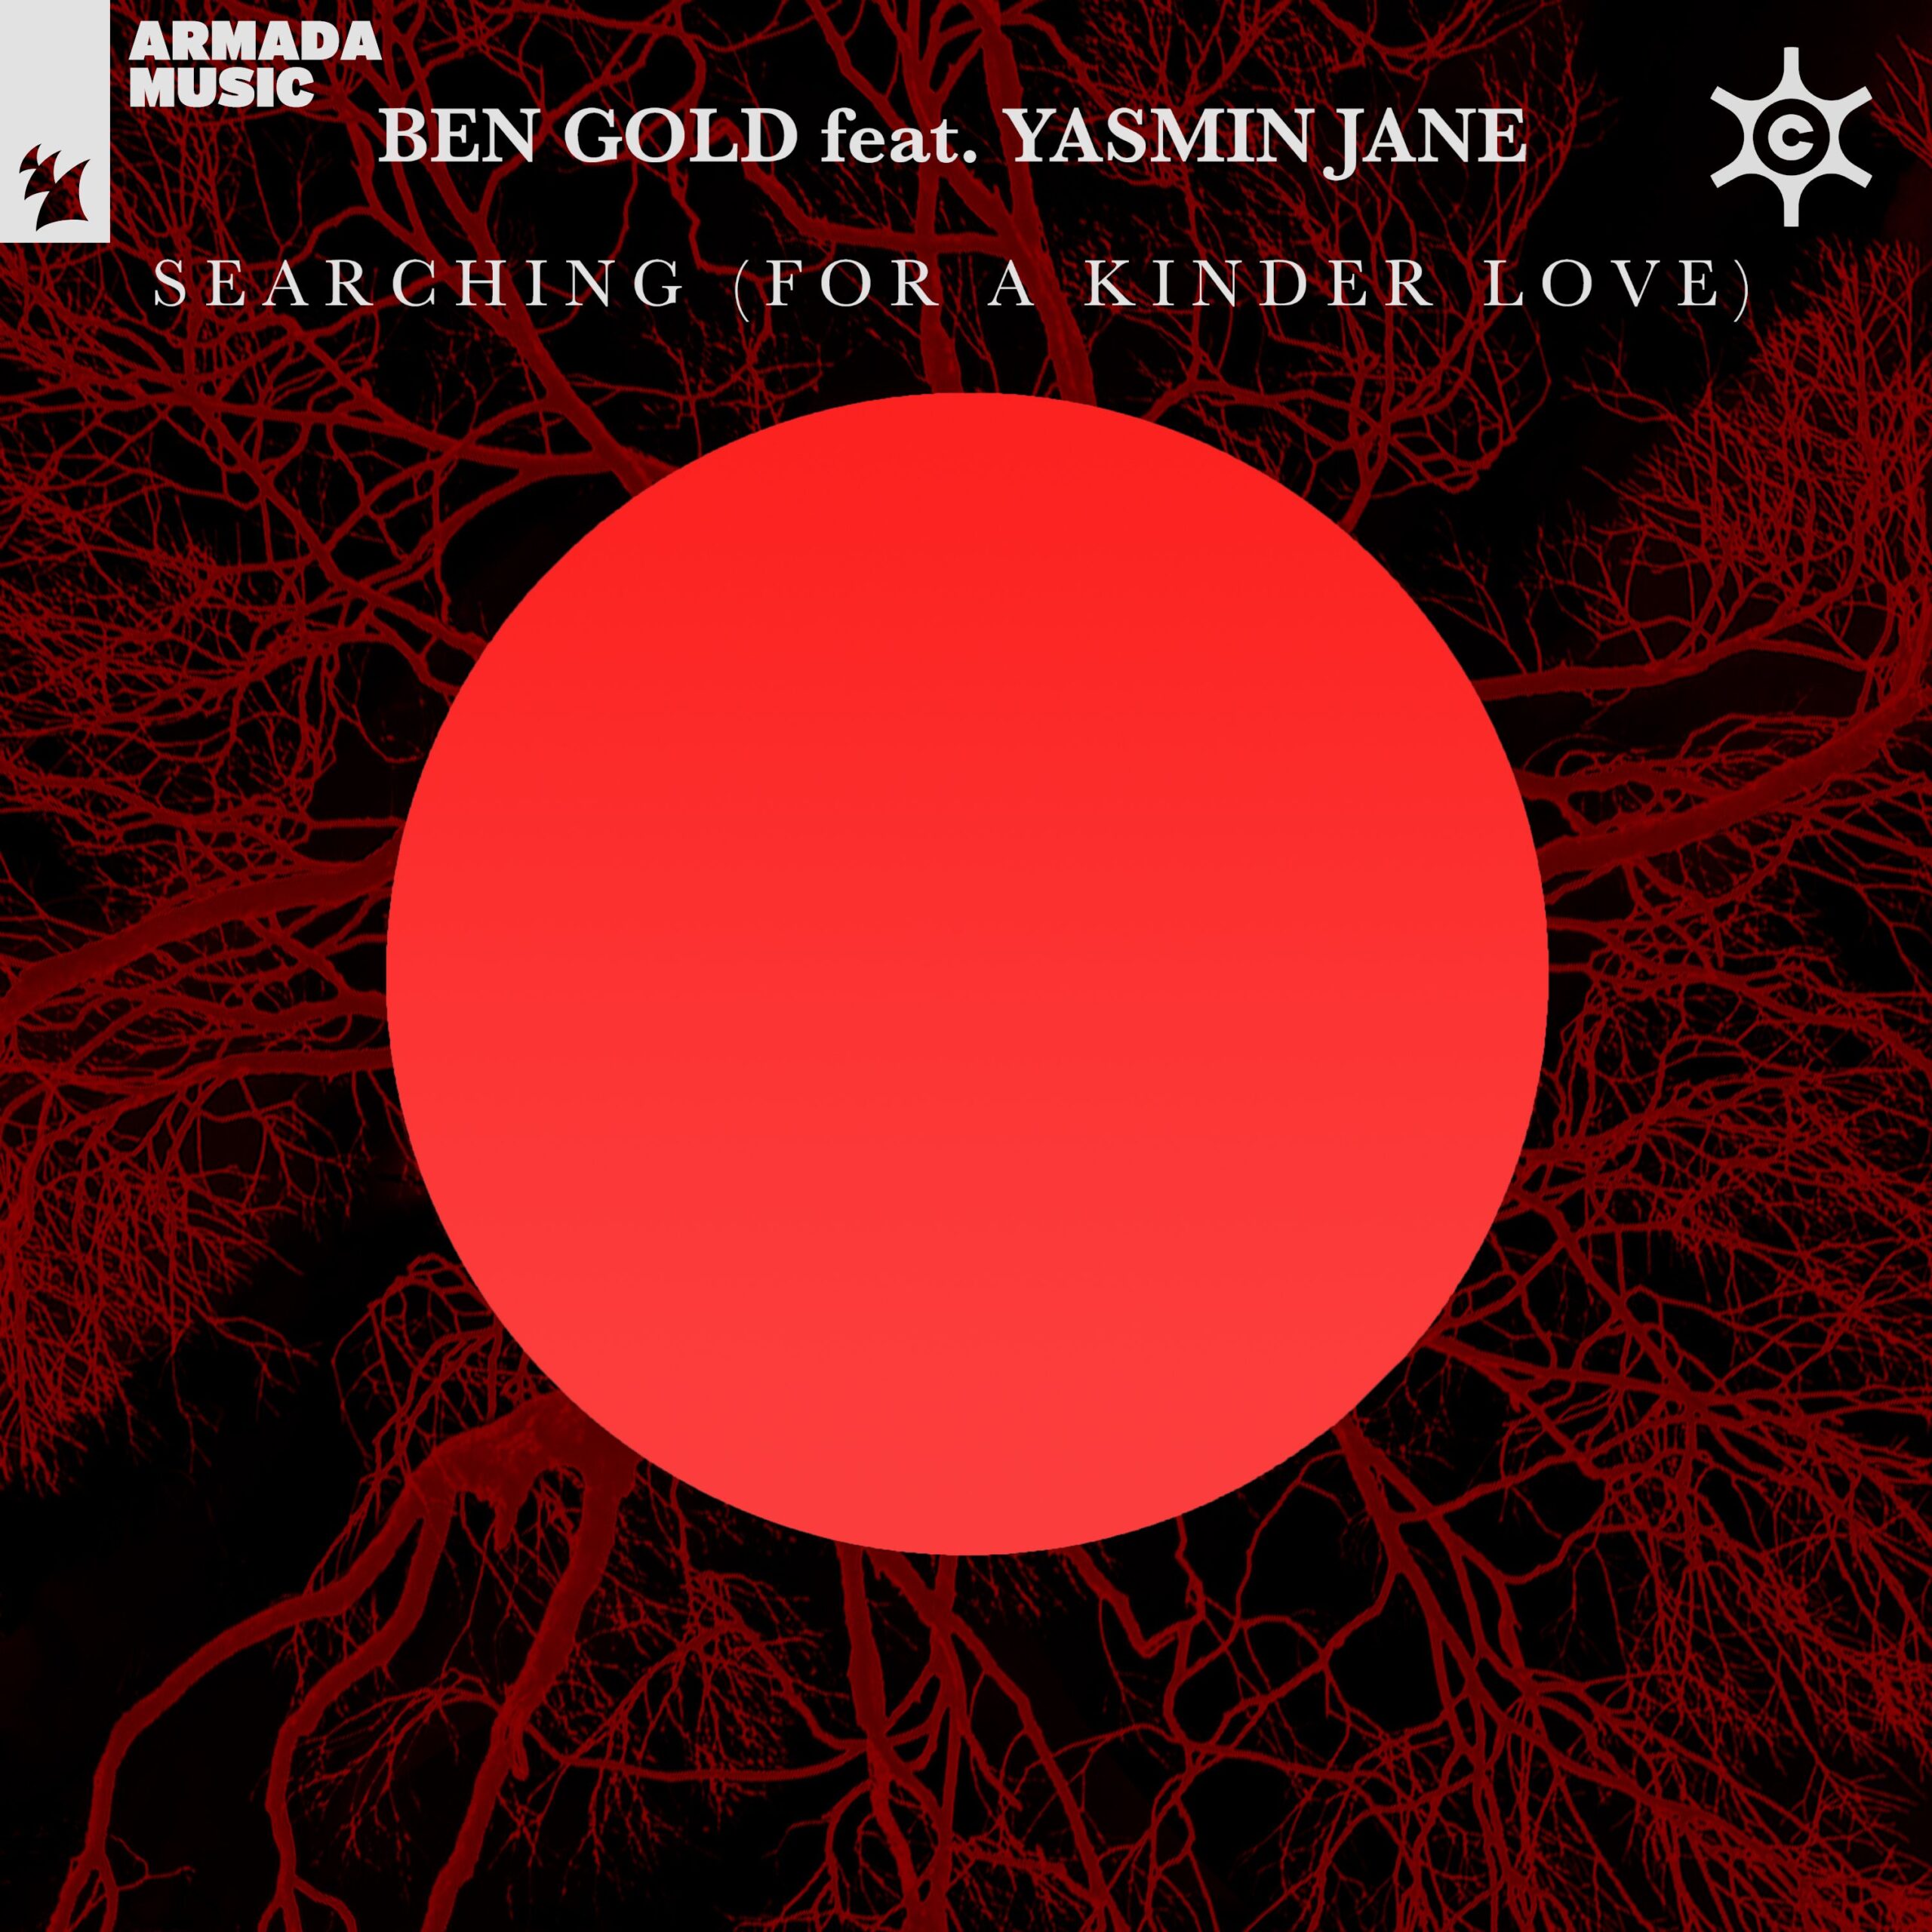 Ben Gold feat. Yasmin Jane presents Searching (For A Kinder Love) on Captivating